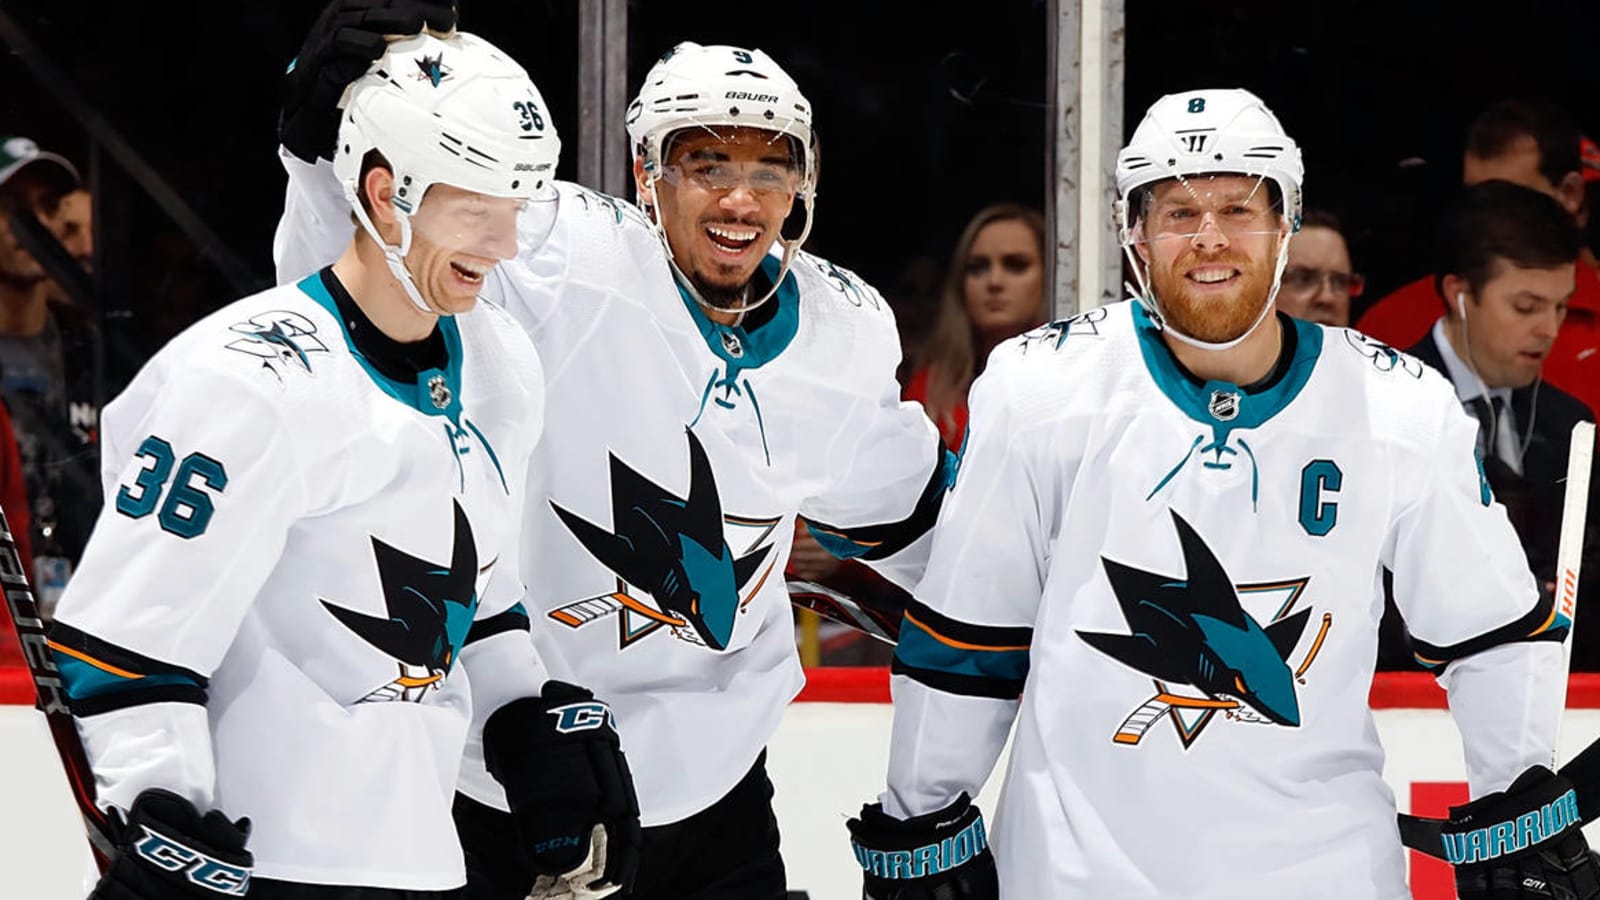 New-look Sharks have Golden Knights in their sights